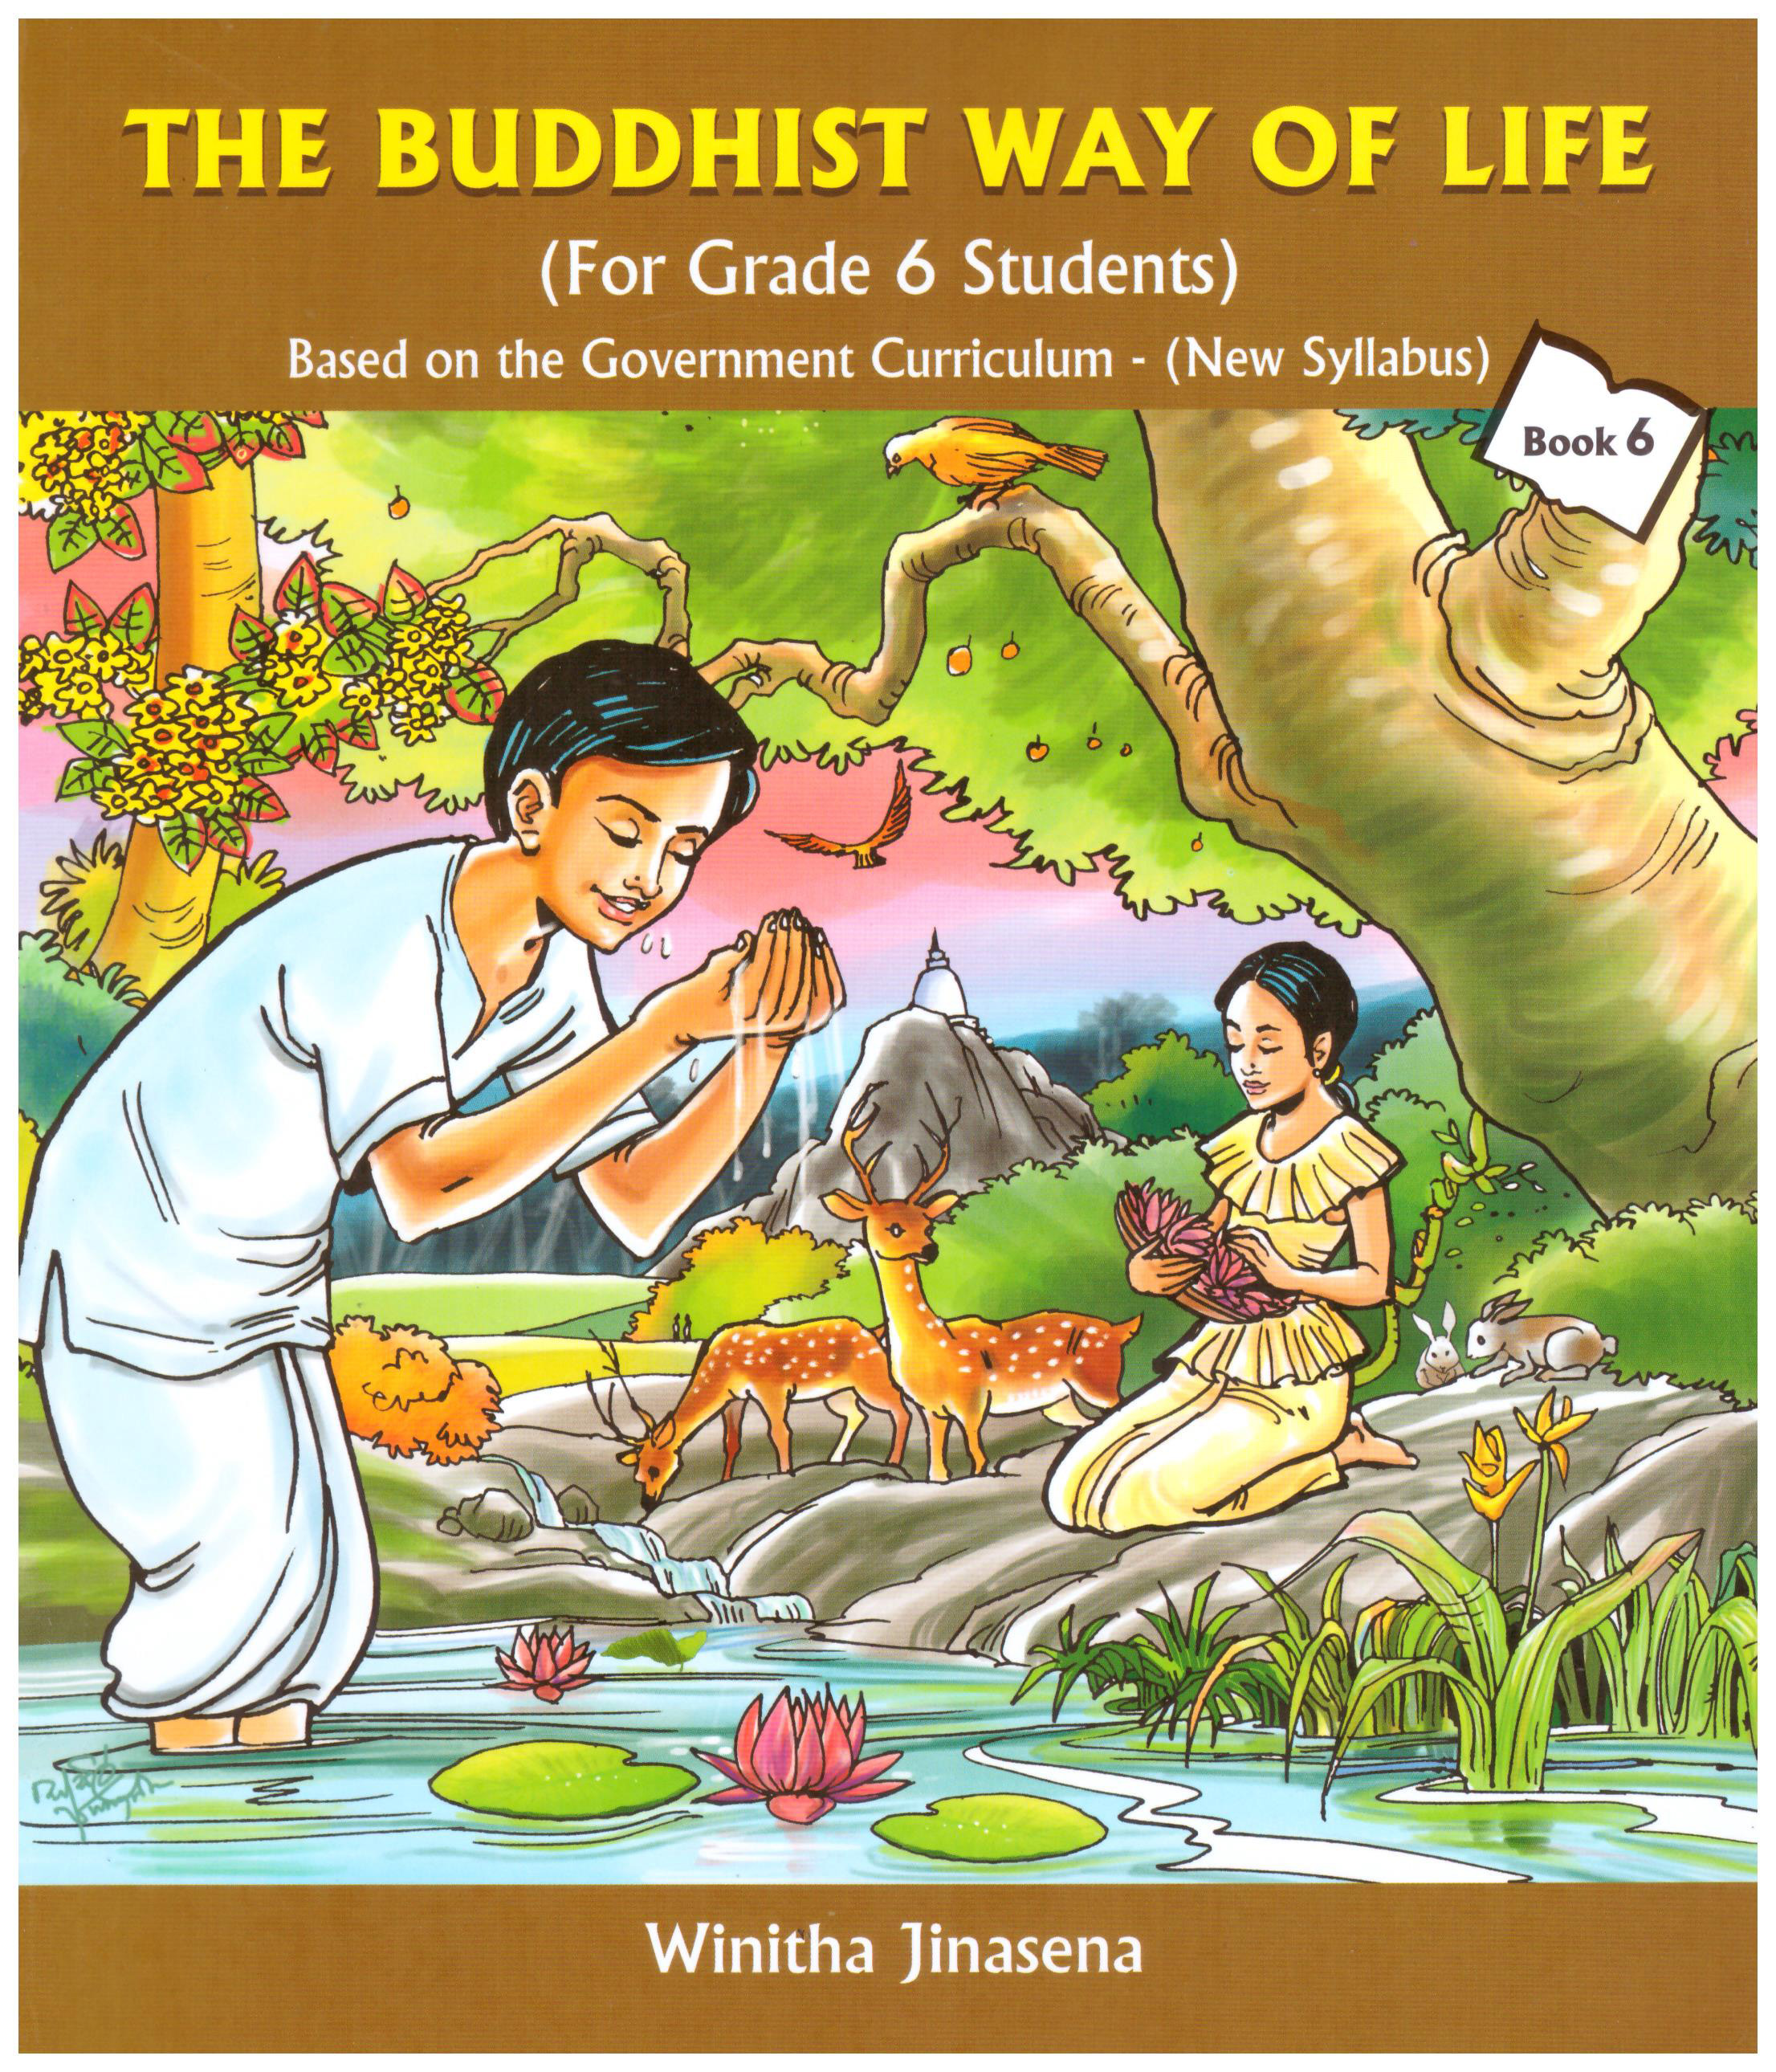 The Buddhist Way of Life Book 6